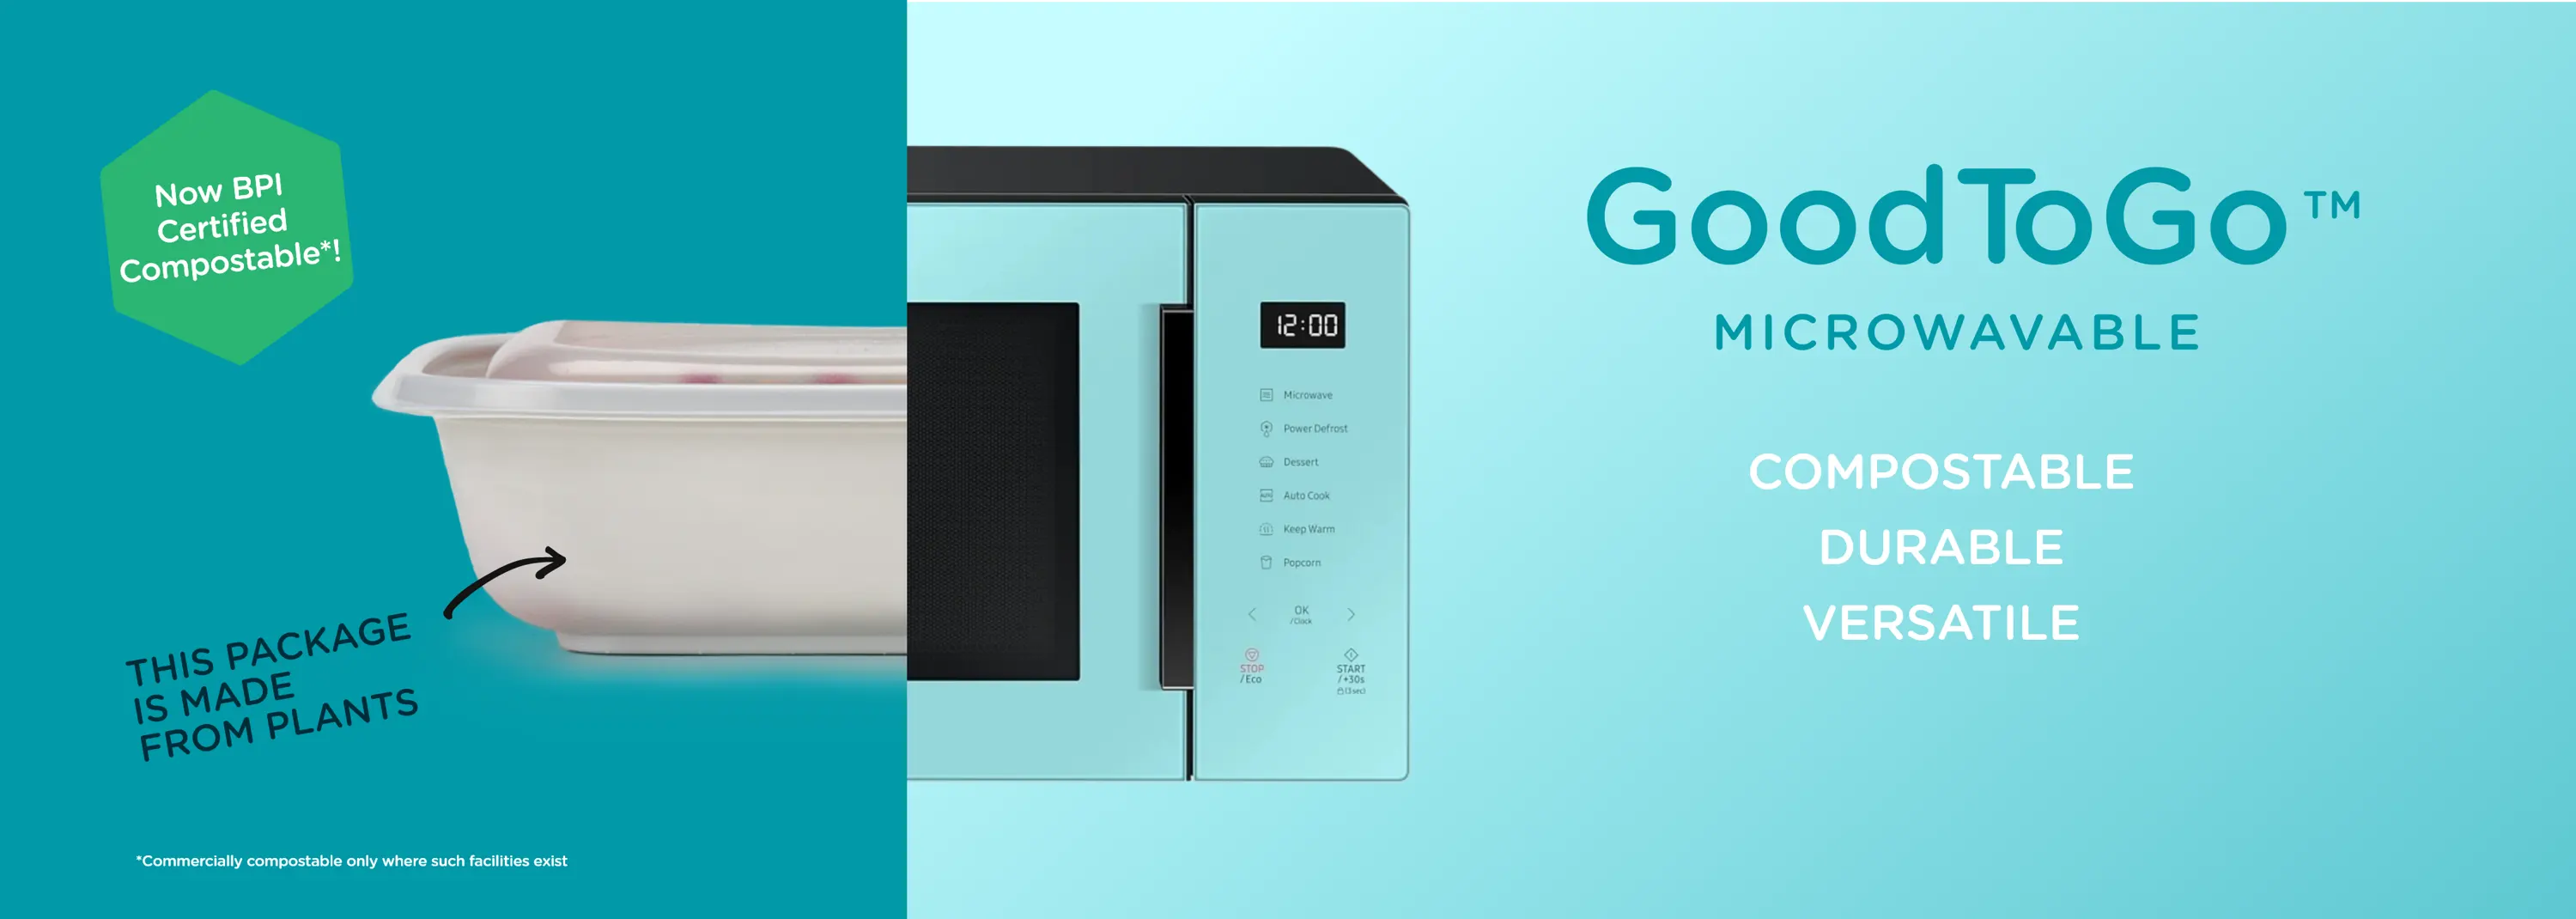 Split image showing a GoodTo Go conatiner and a microwave oven.